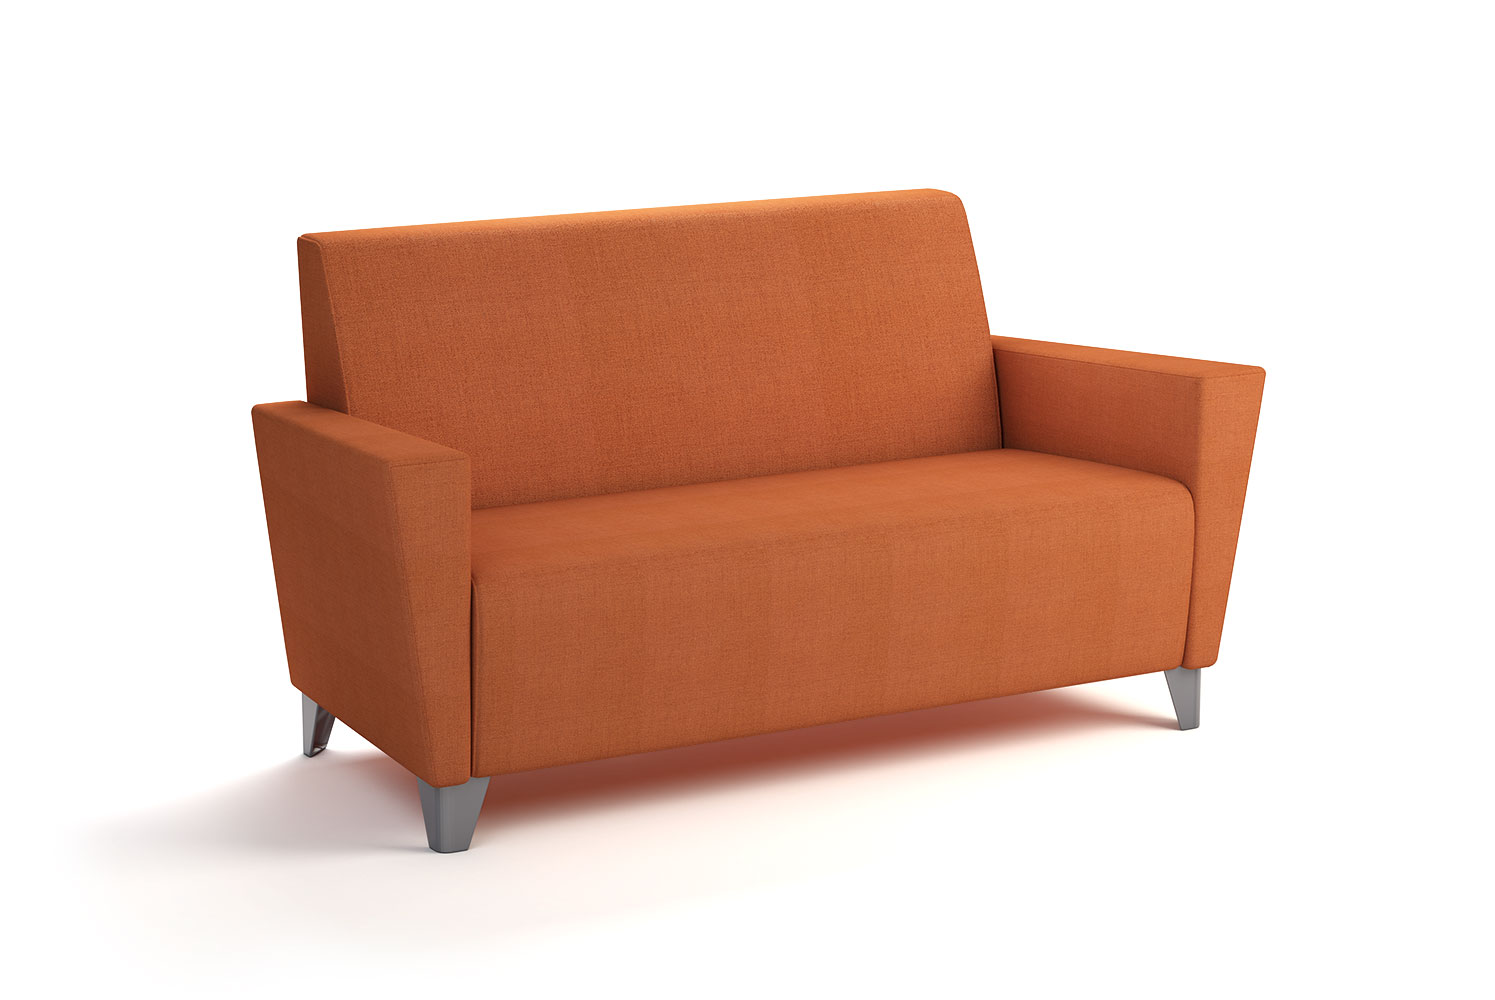 Flair two seat lounge in orange fabric color